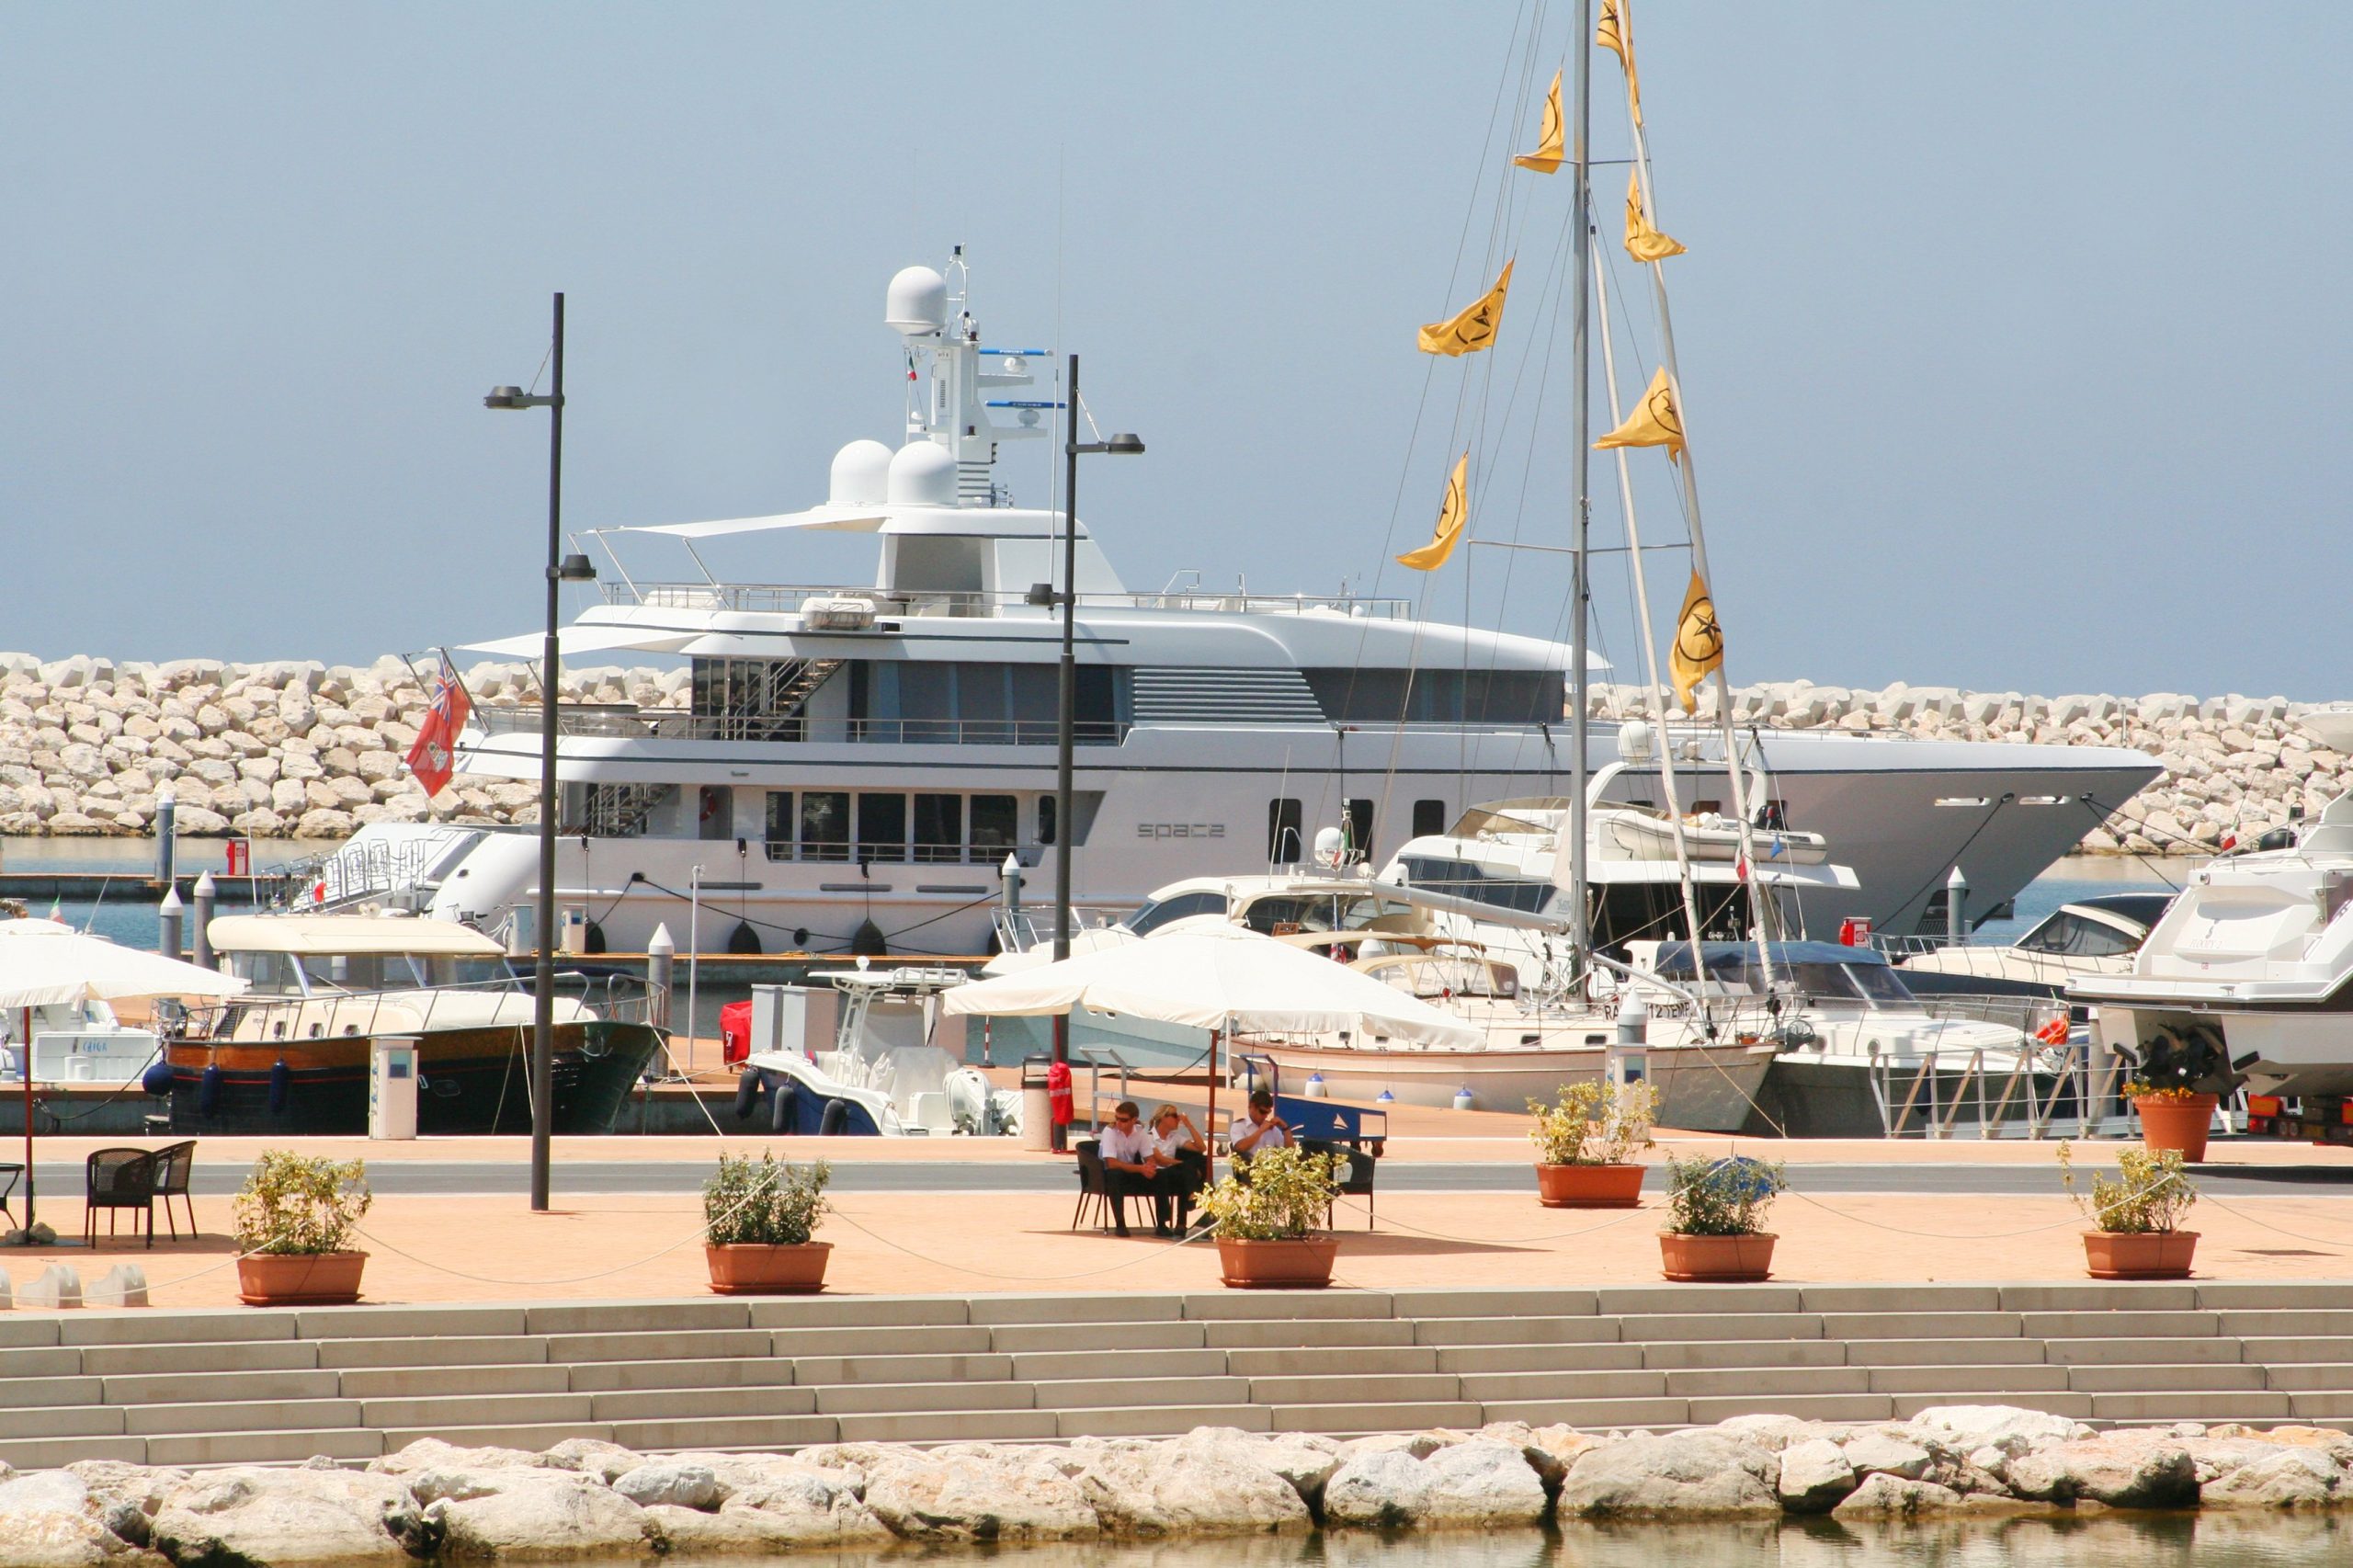 Join us for a great line-up of professional development seminars during Monaco Yacht Show week